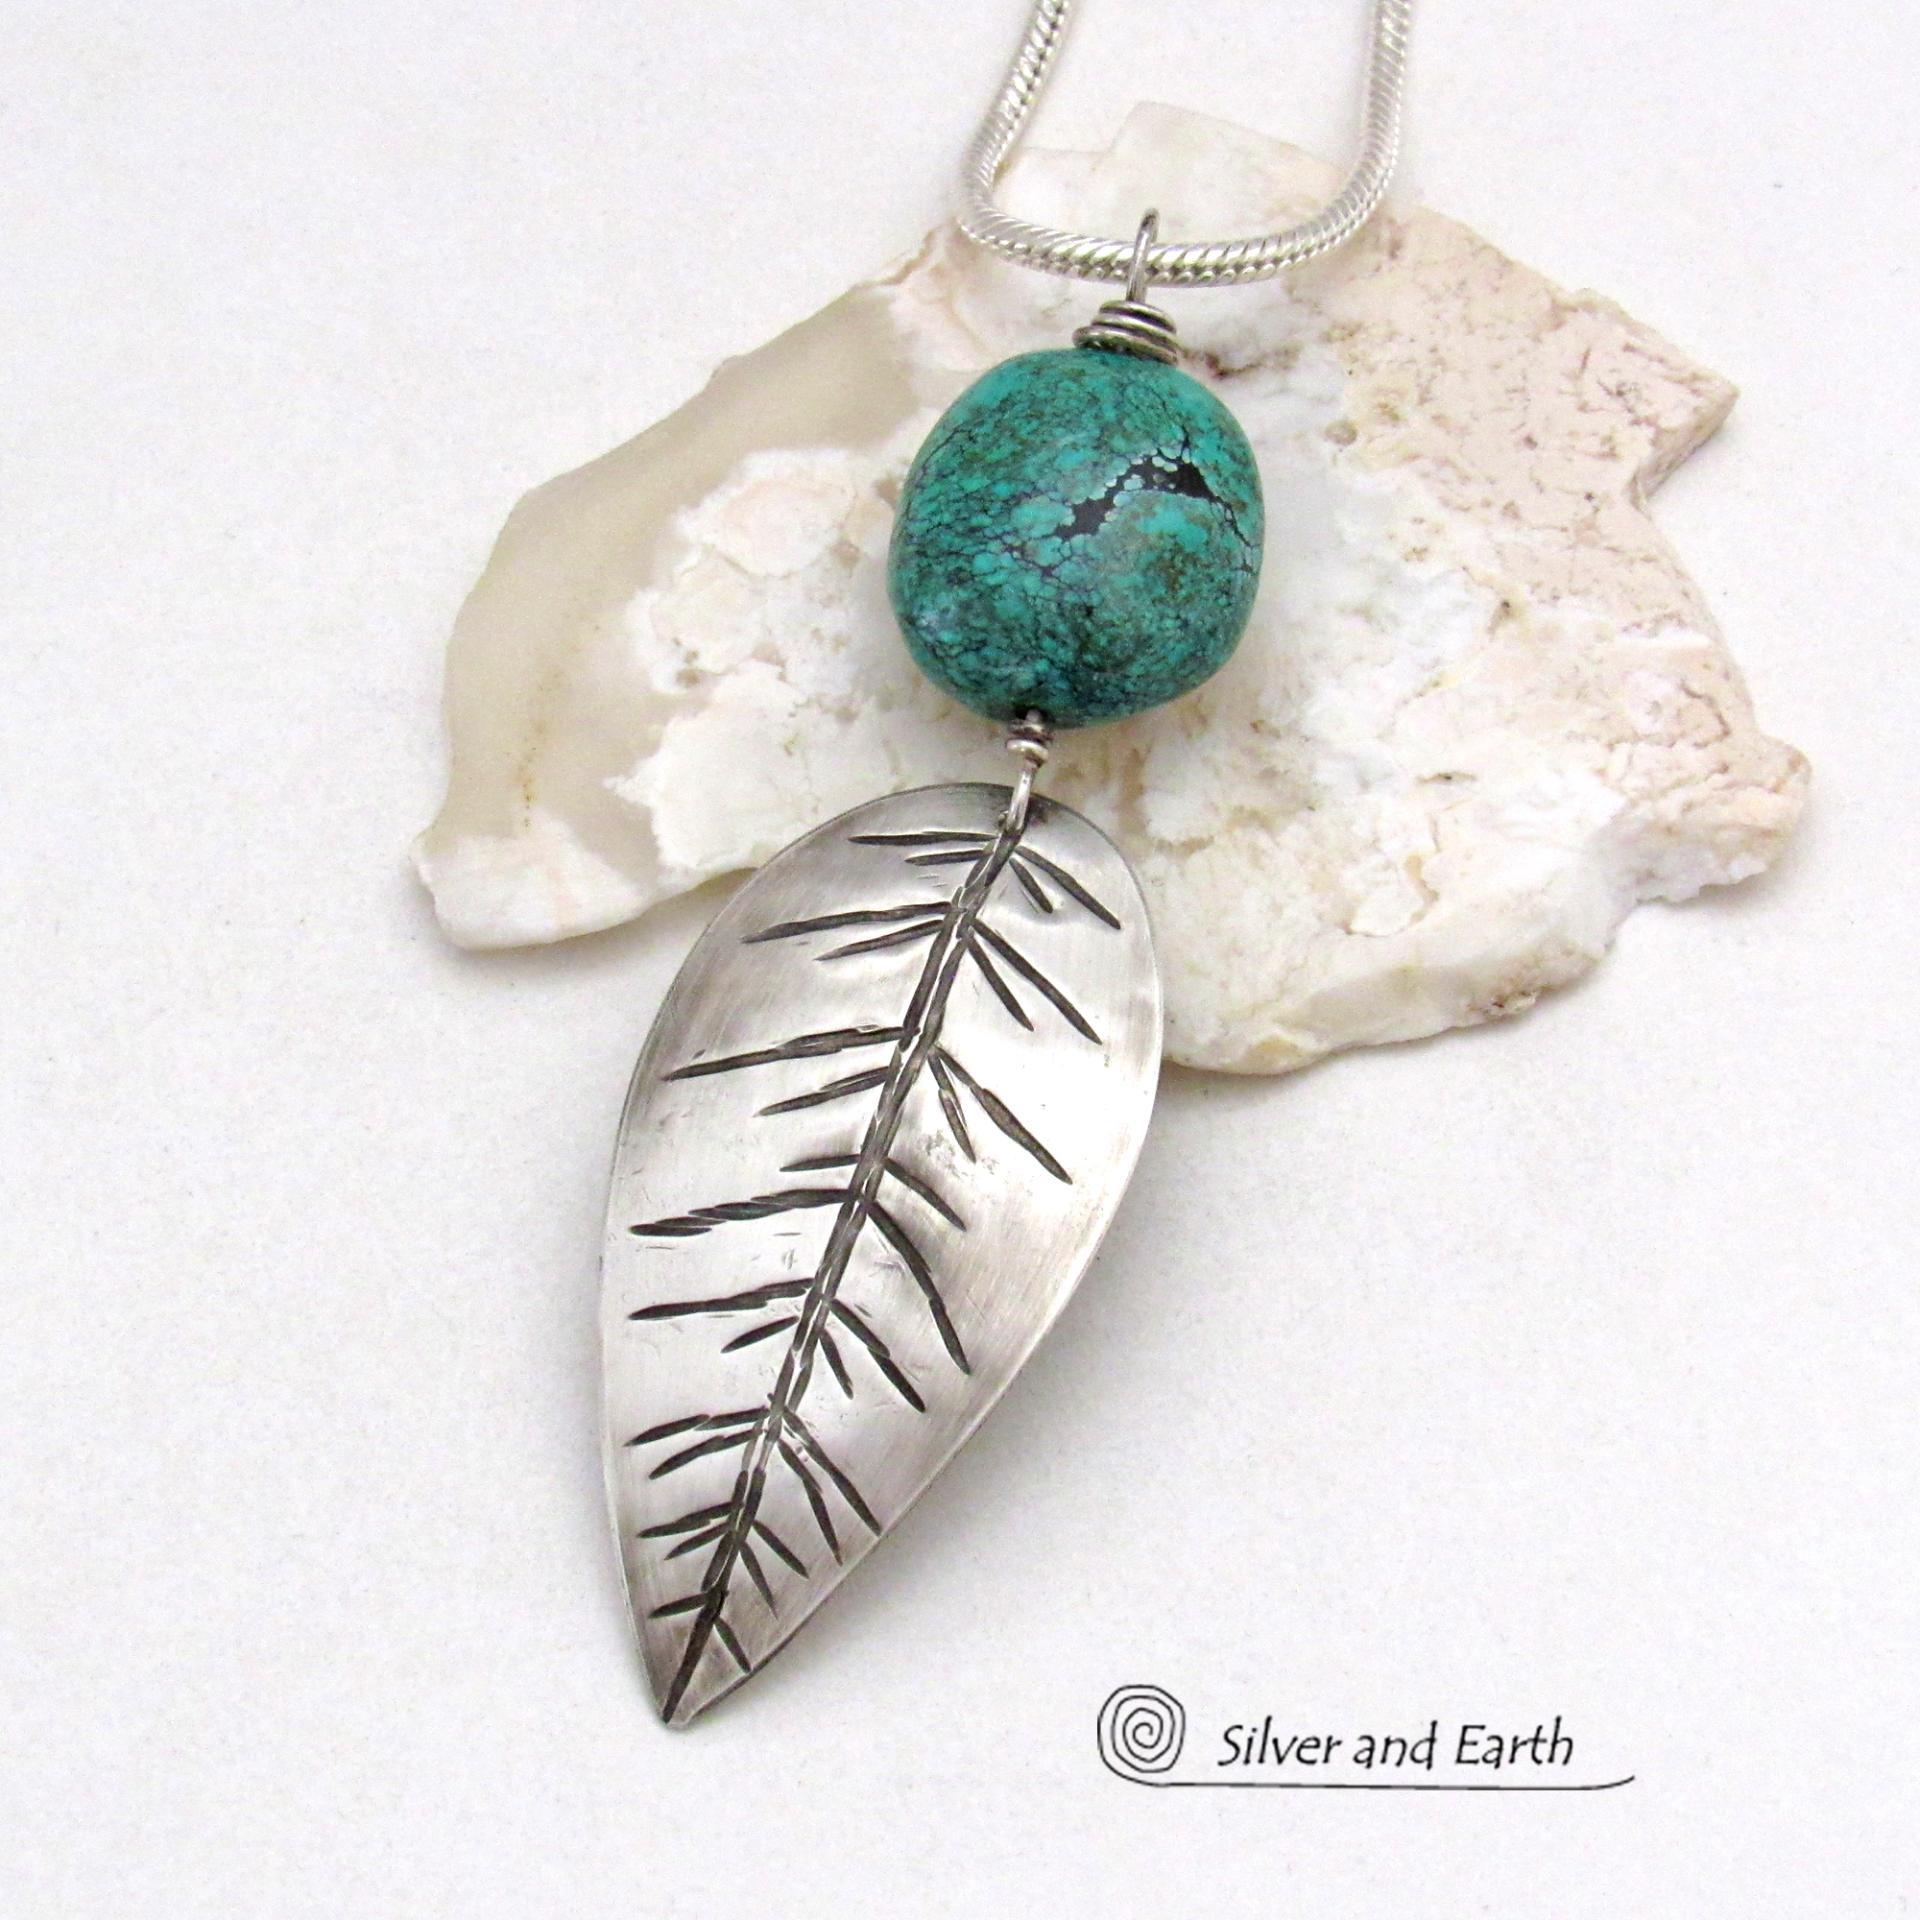 Sterling Silver Feather Necklace with Turquoise - Modern Southwestern Jewelry